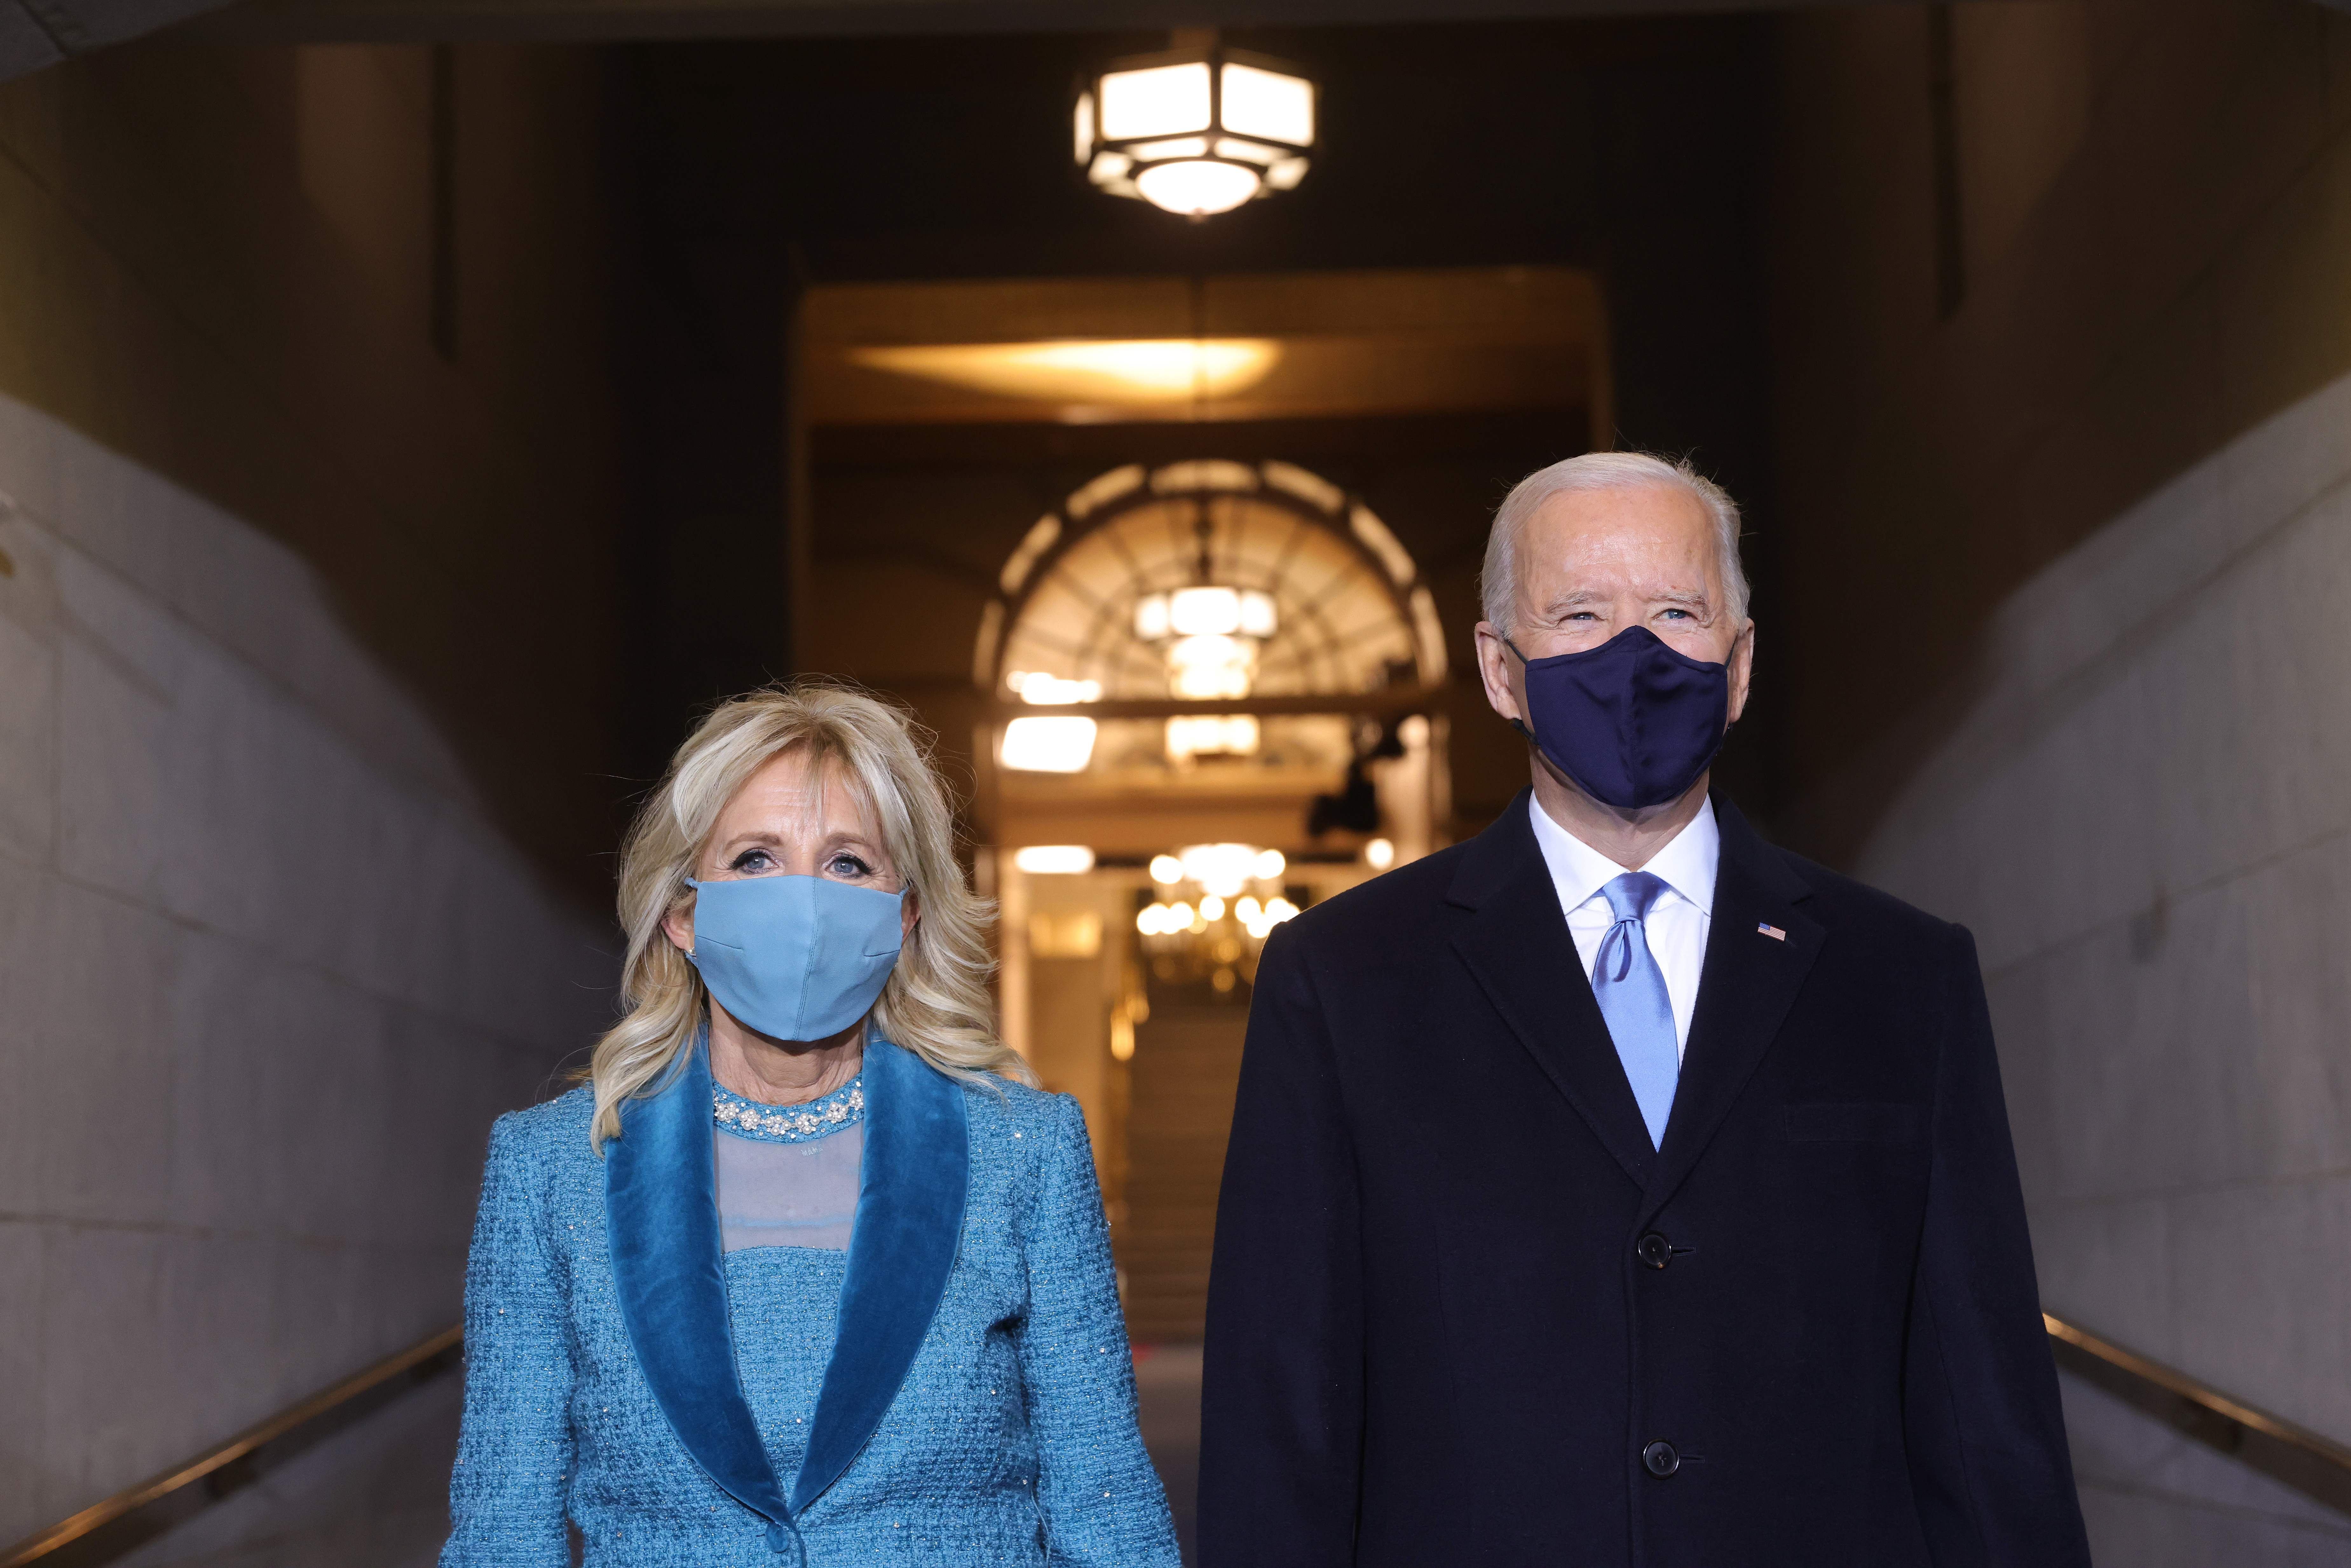 Joe Biden and Jill Biden arrive before his inauguration as the 46th President of the United States on the West Front of the US Capitol in Washington,DC on January 20, 2021. | Photo: Getty Images. 